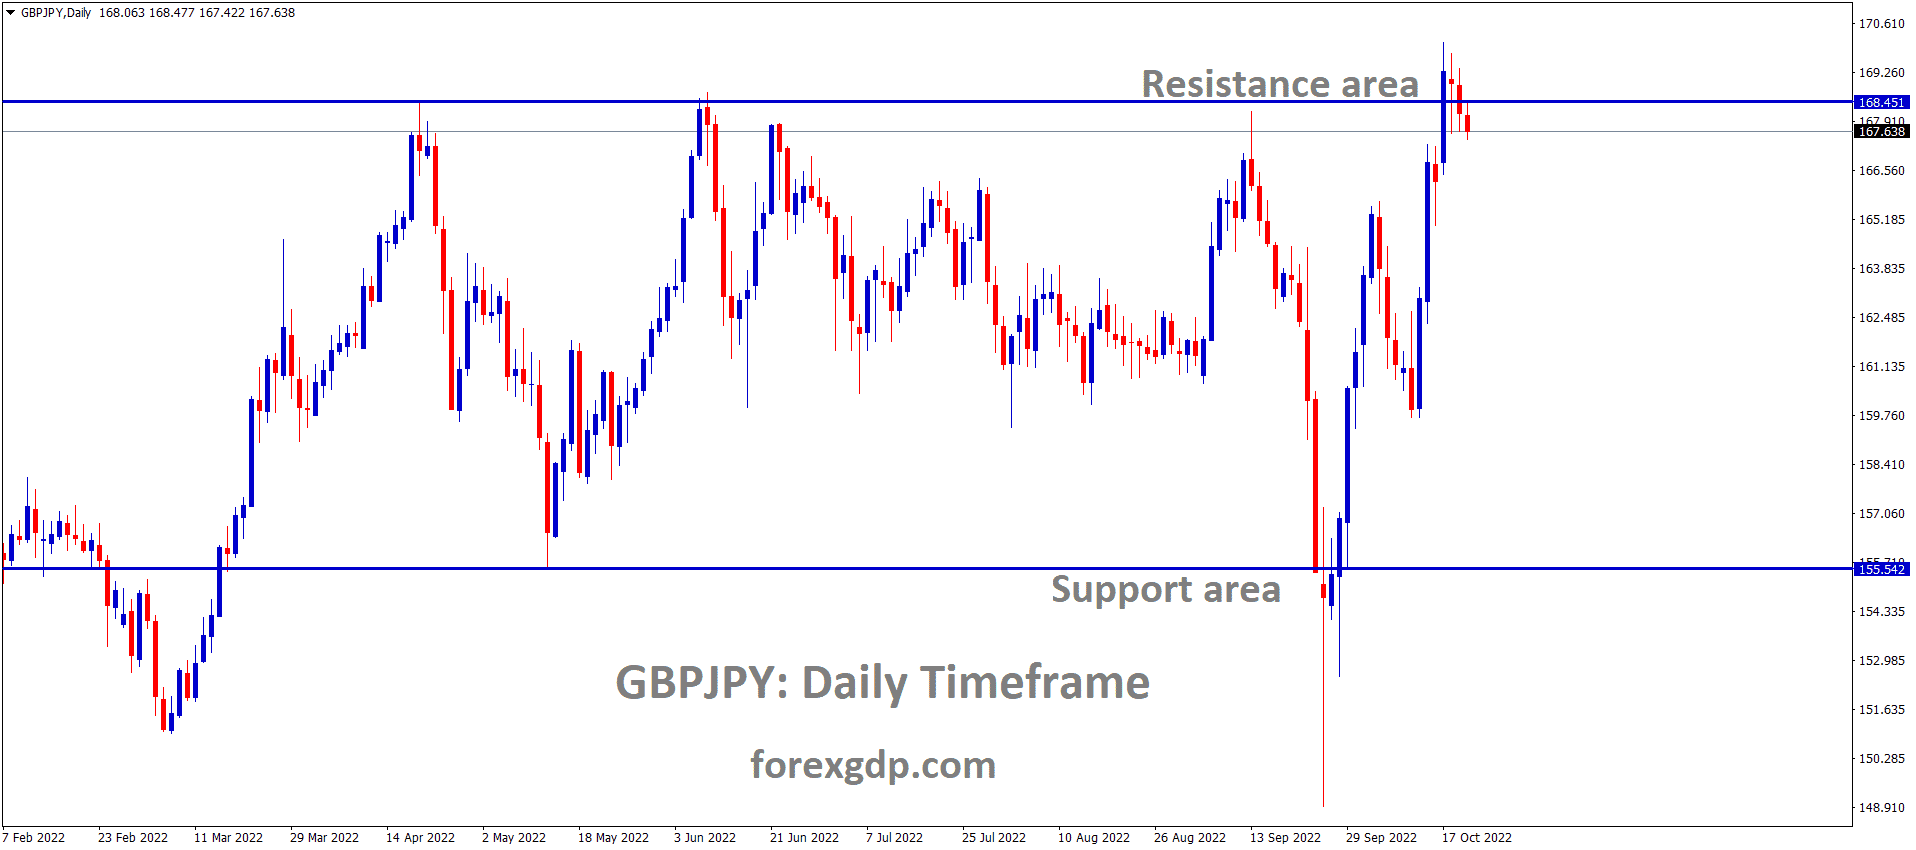 GBPJPY is moving in the Box pattern and the market has reached the horizontal resistance area of the pattern